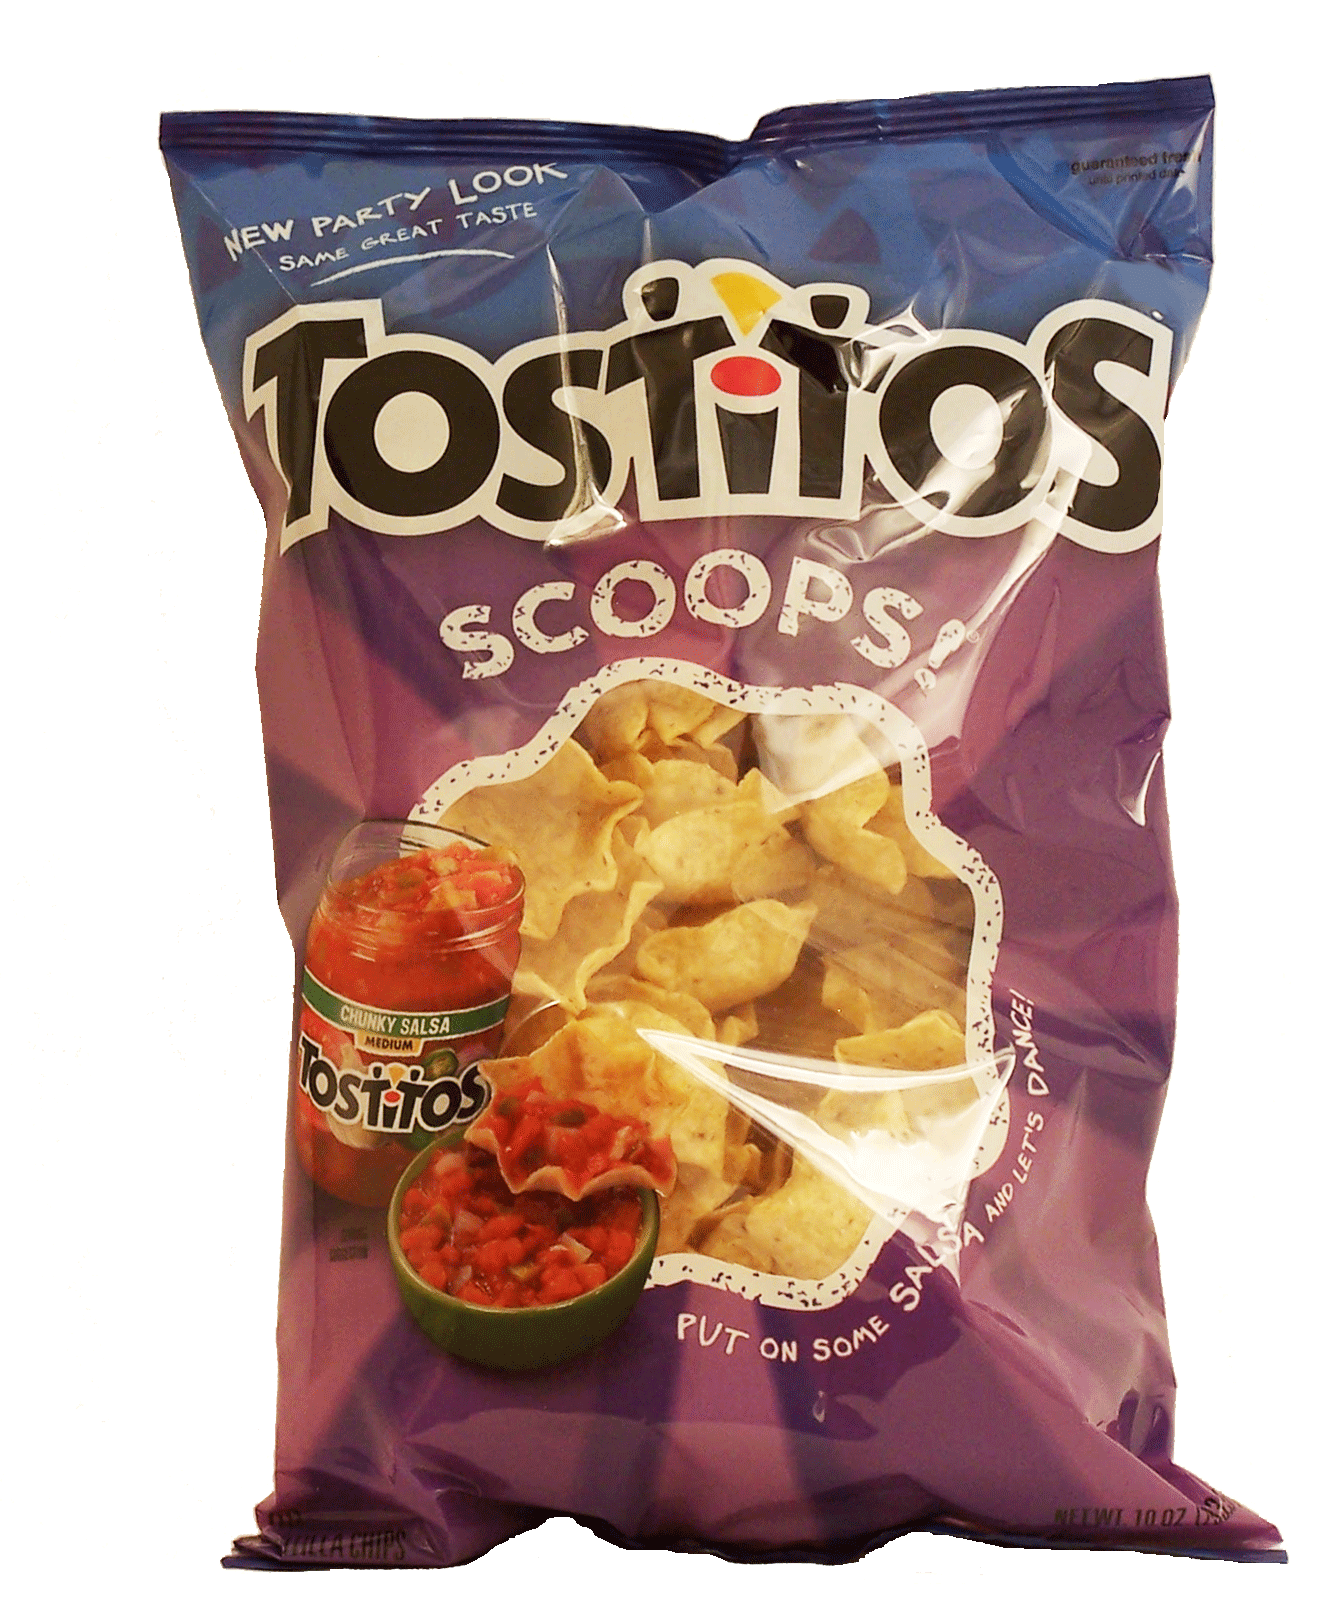 Tostitos Scoops bowl shaped 100% white corn tortilla chips Full-Size Picture